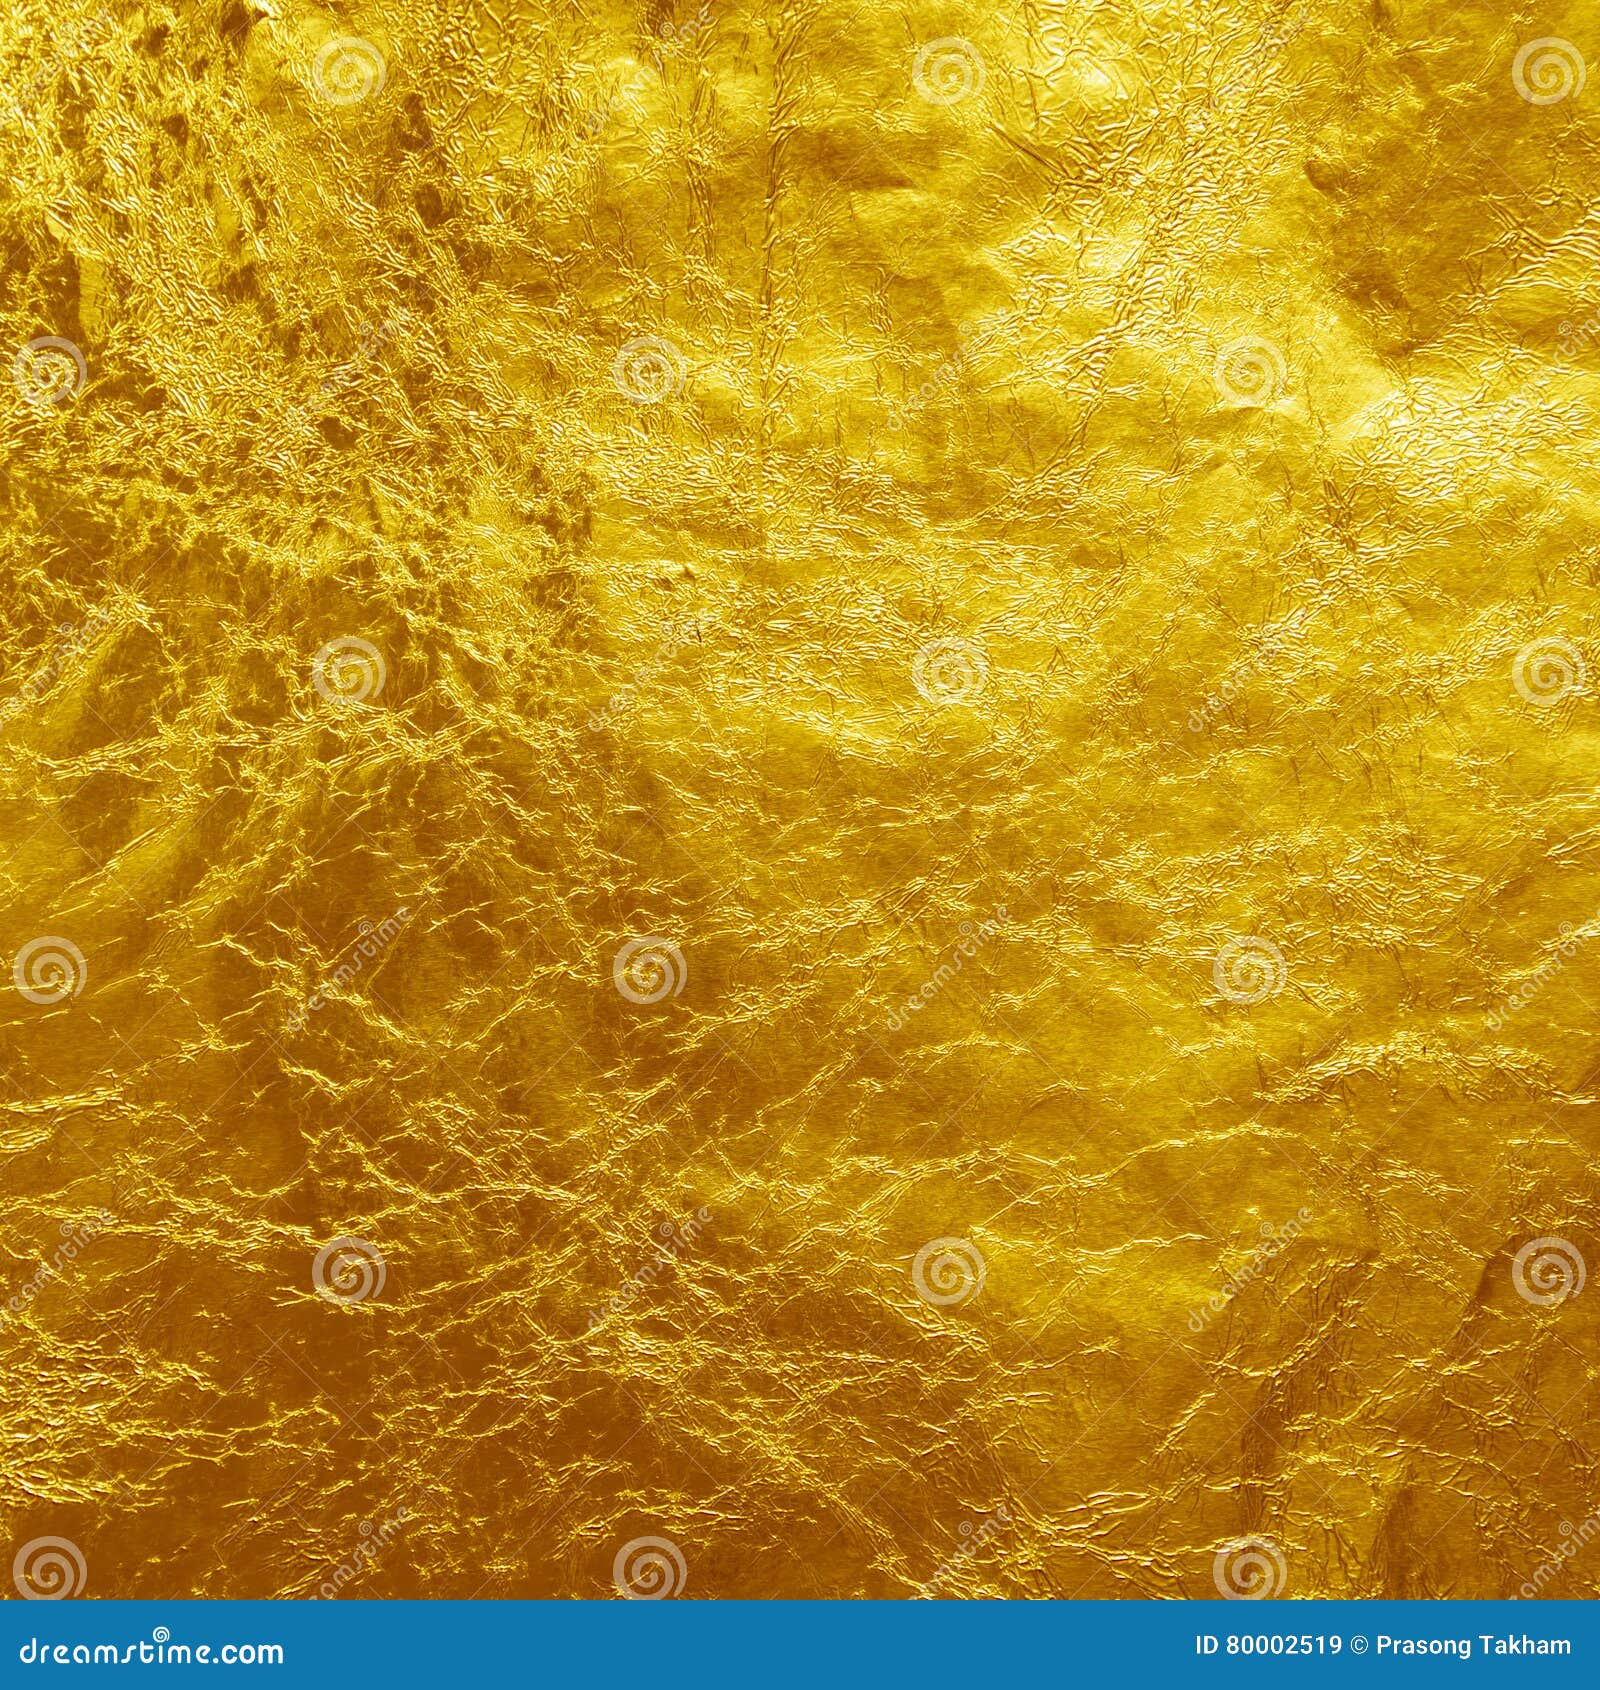 Gold Foil Texture Background Stock Image - Image of decor, fabric: 80002519